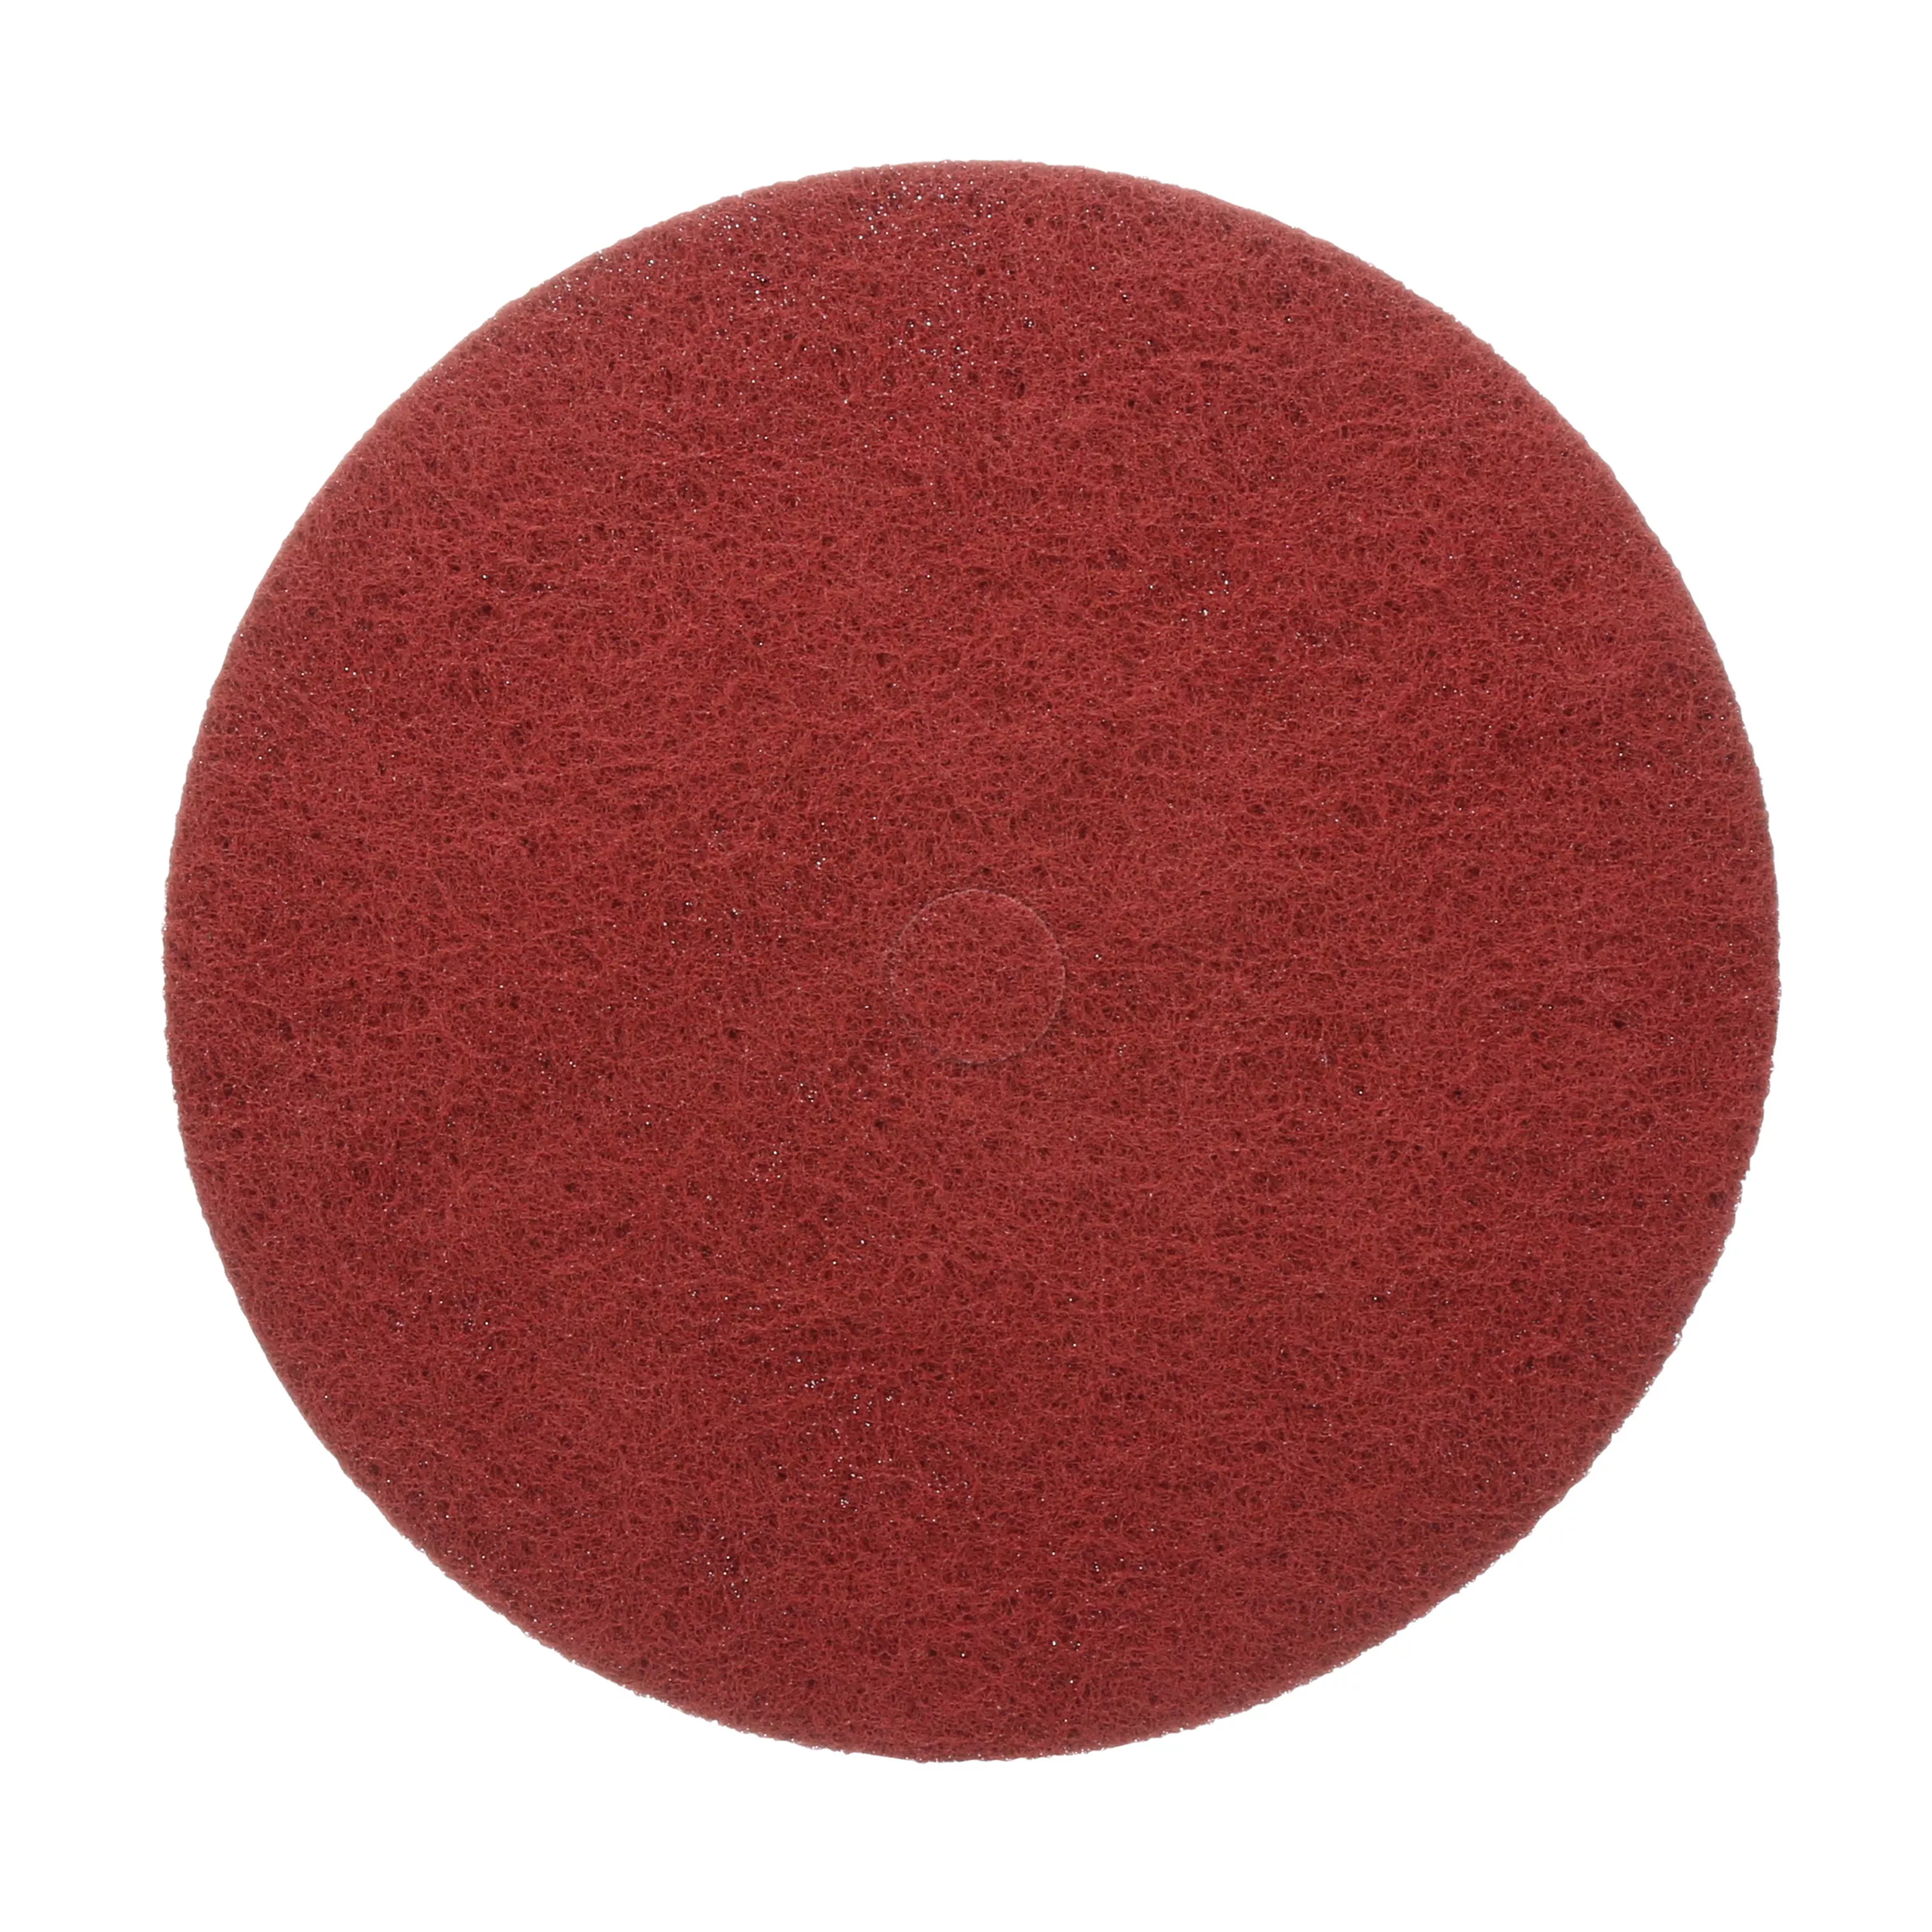 Standard Abrasives™ Buff and Blend HP Disc, 859128, 12 in x 1-1/4 in A
VFN, 5/Pac, 50 ea/Case